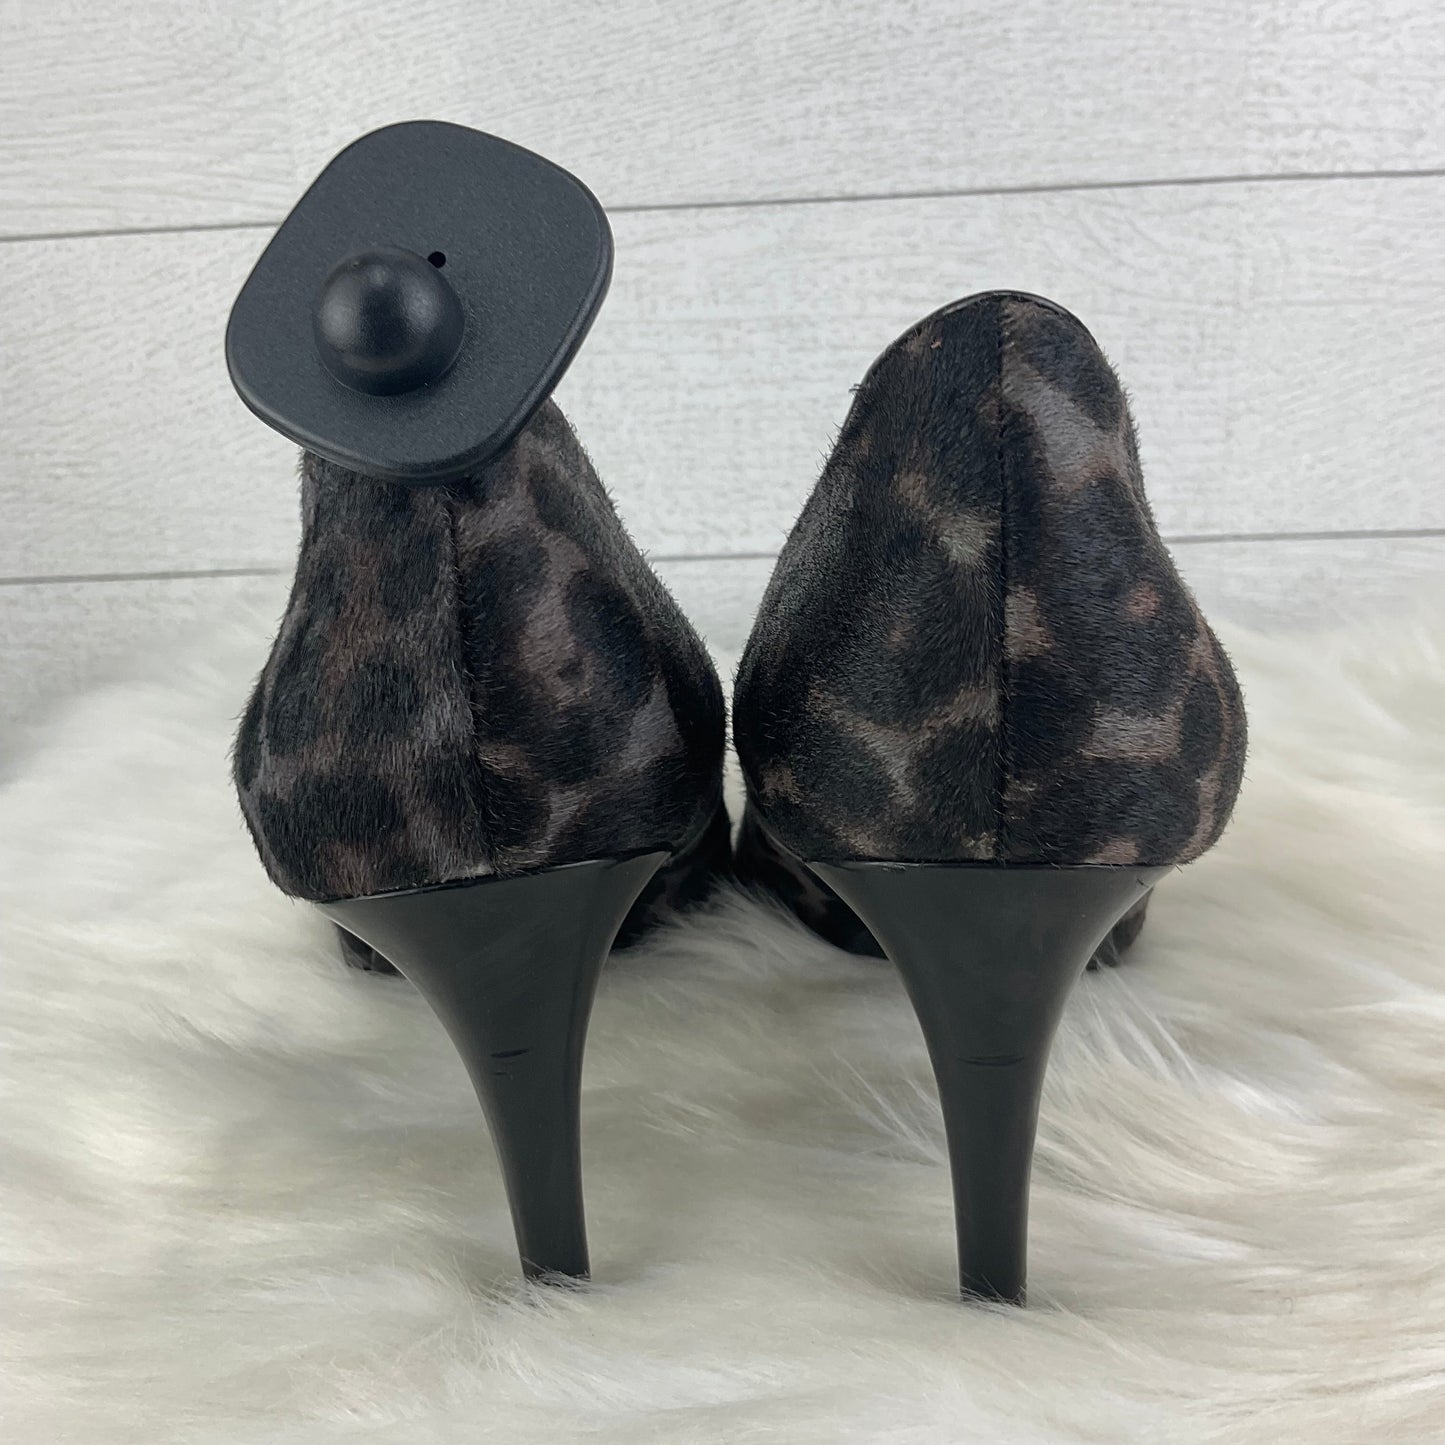 Shoes Heels Stiletto By Nine West  Size: 11